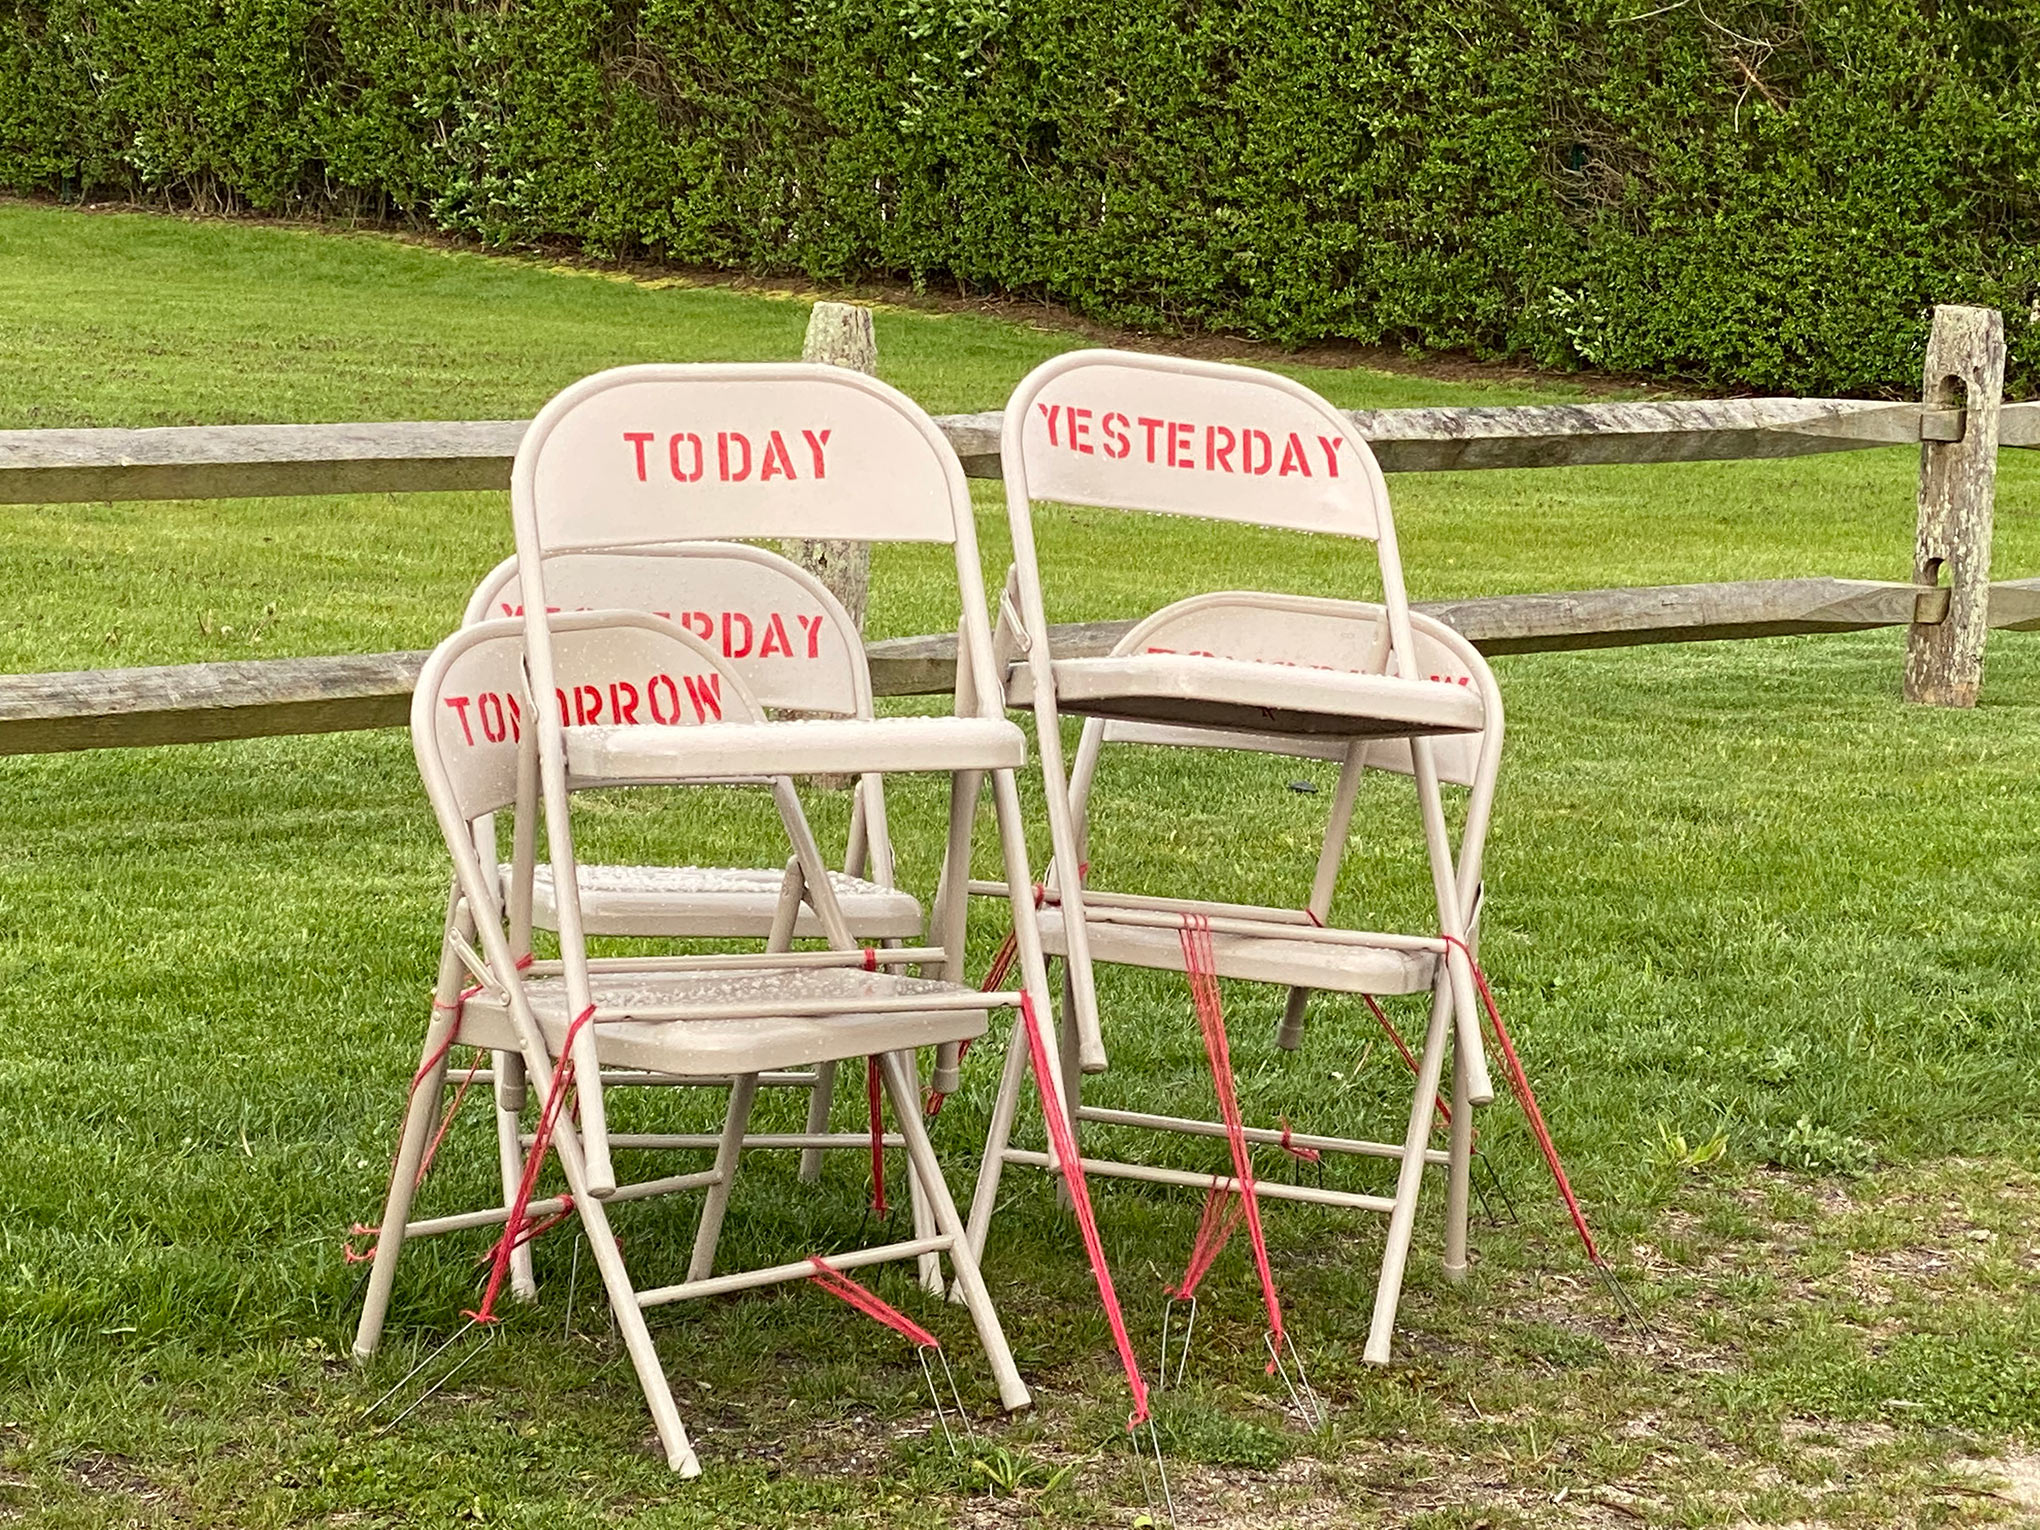 In a “Drive-by-Art” show in New York, Toni Ross and Sara Salaway exhibited When, a social-­isolation “calendar” of jumbled chairs with date-related words (Courtesy of Toni Ross and Sara Salaway)